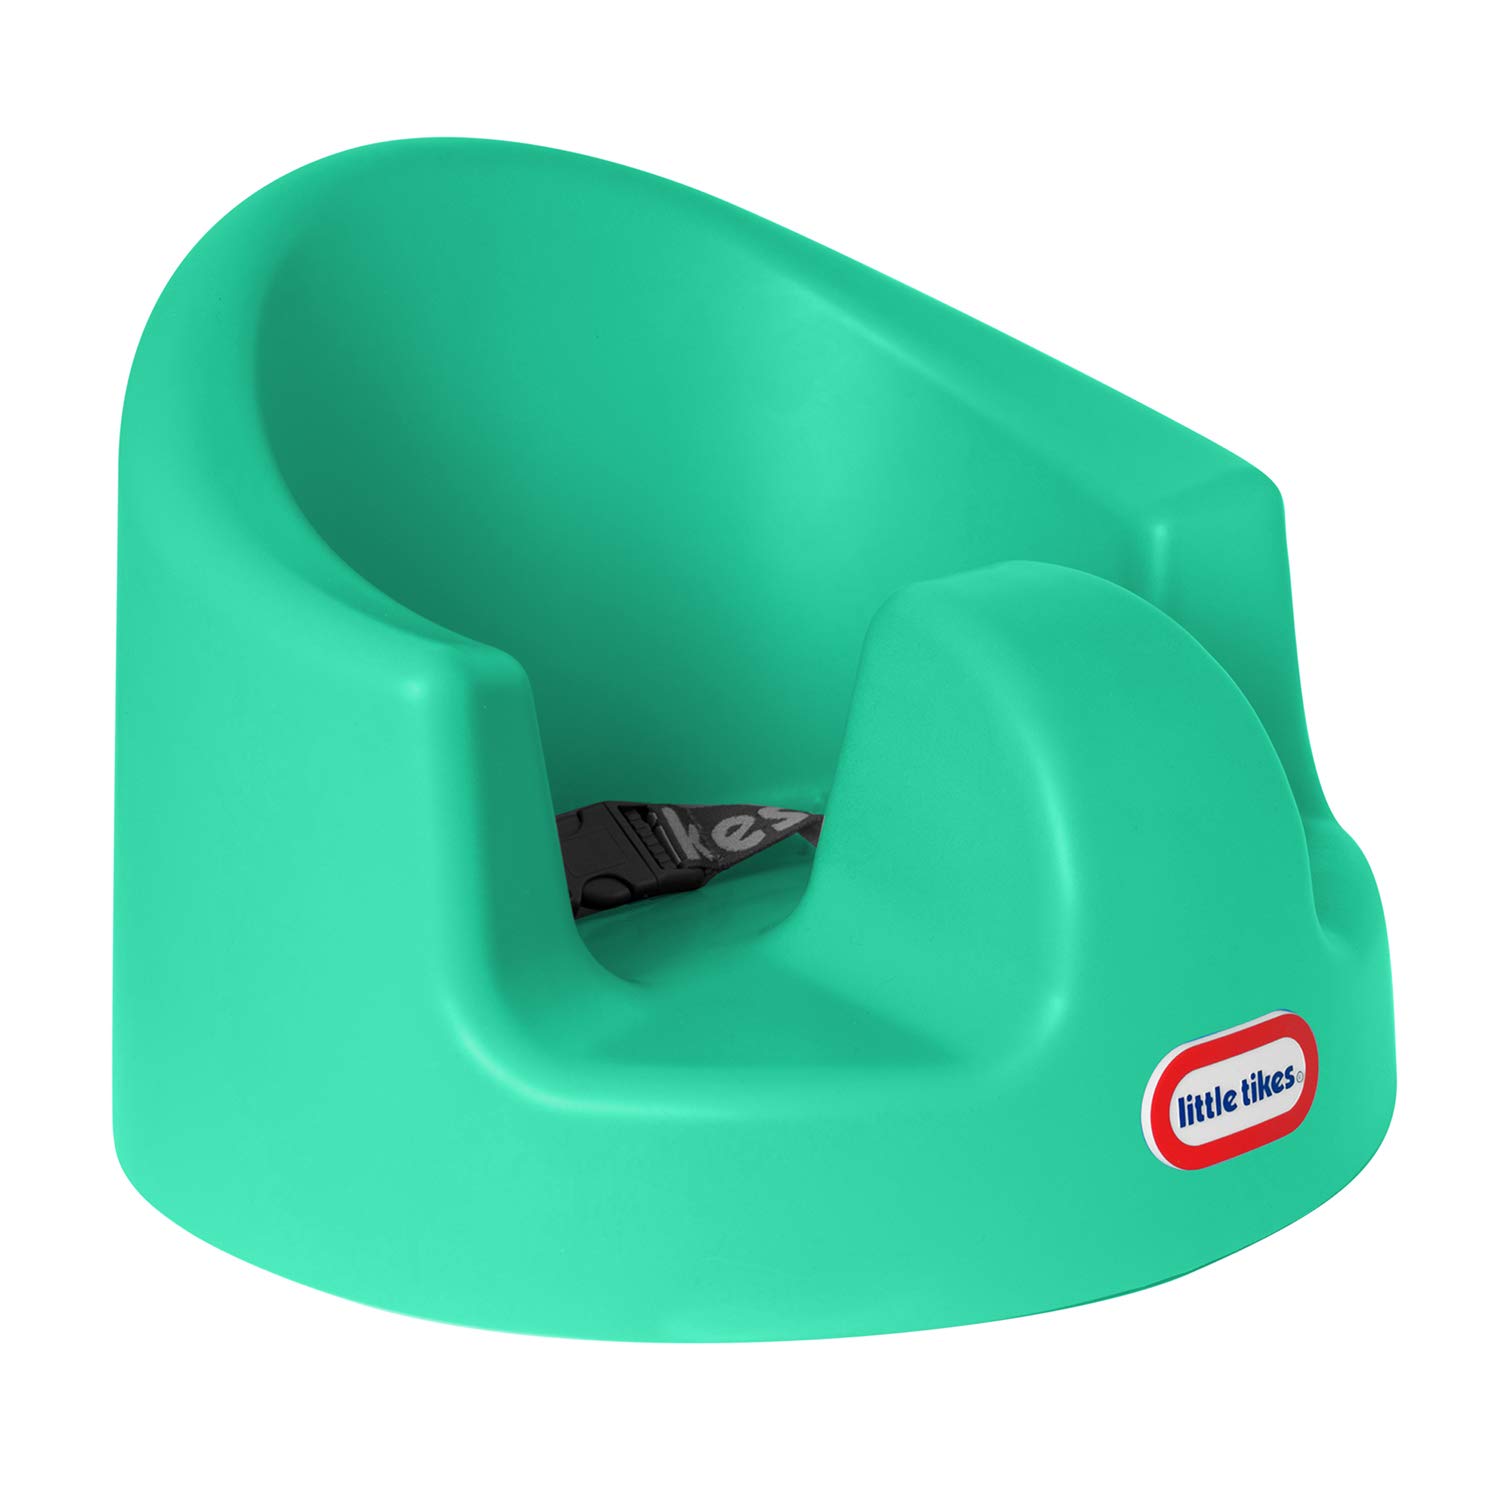 Little Tikes Infant Supporting Floor Seat